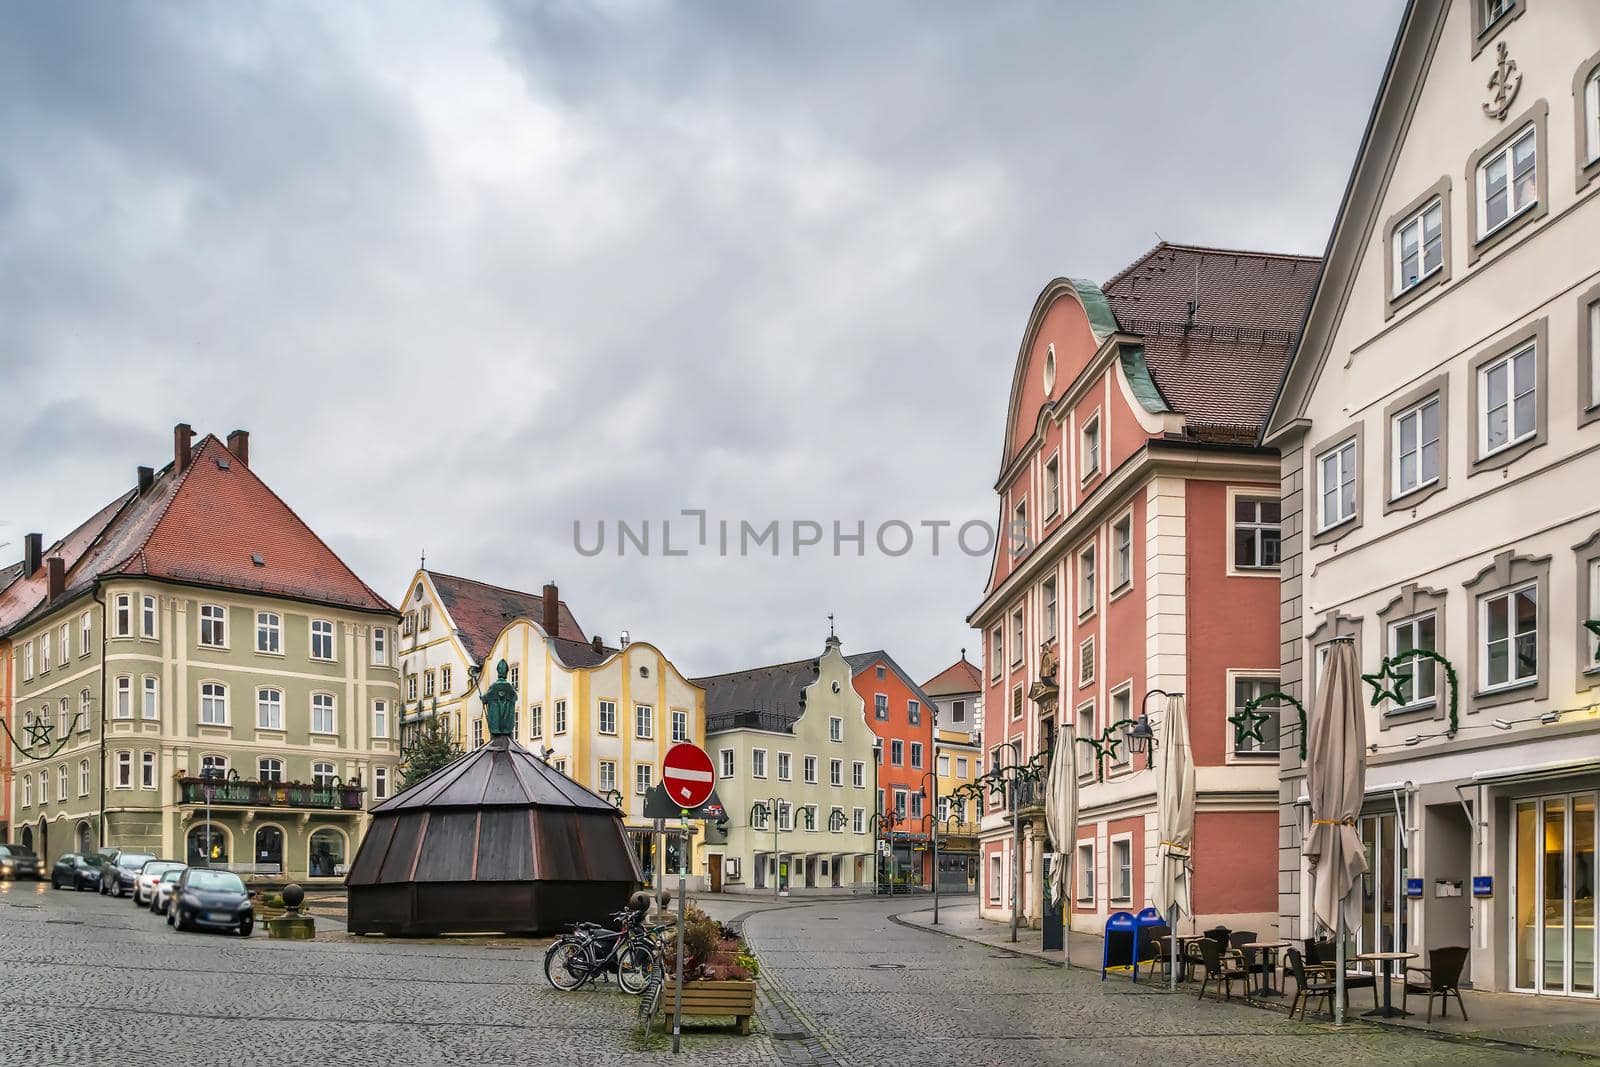 Main market square with historical houses in Eichstatt, Germany